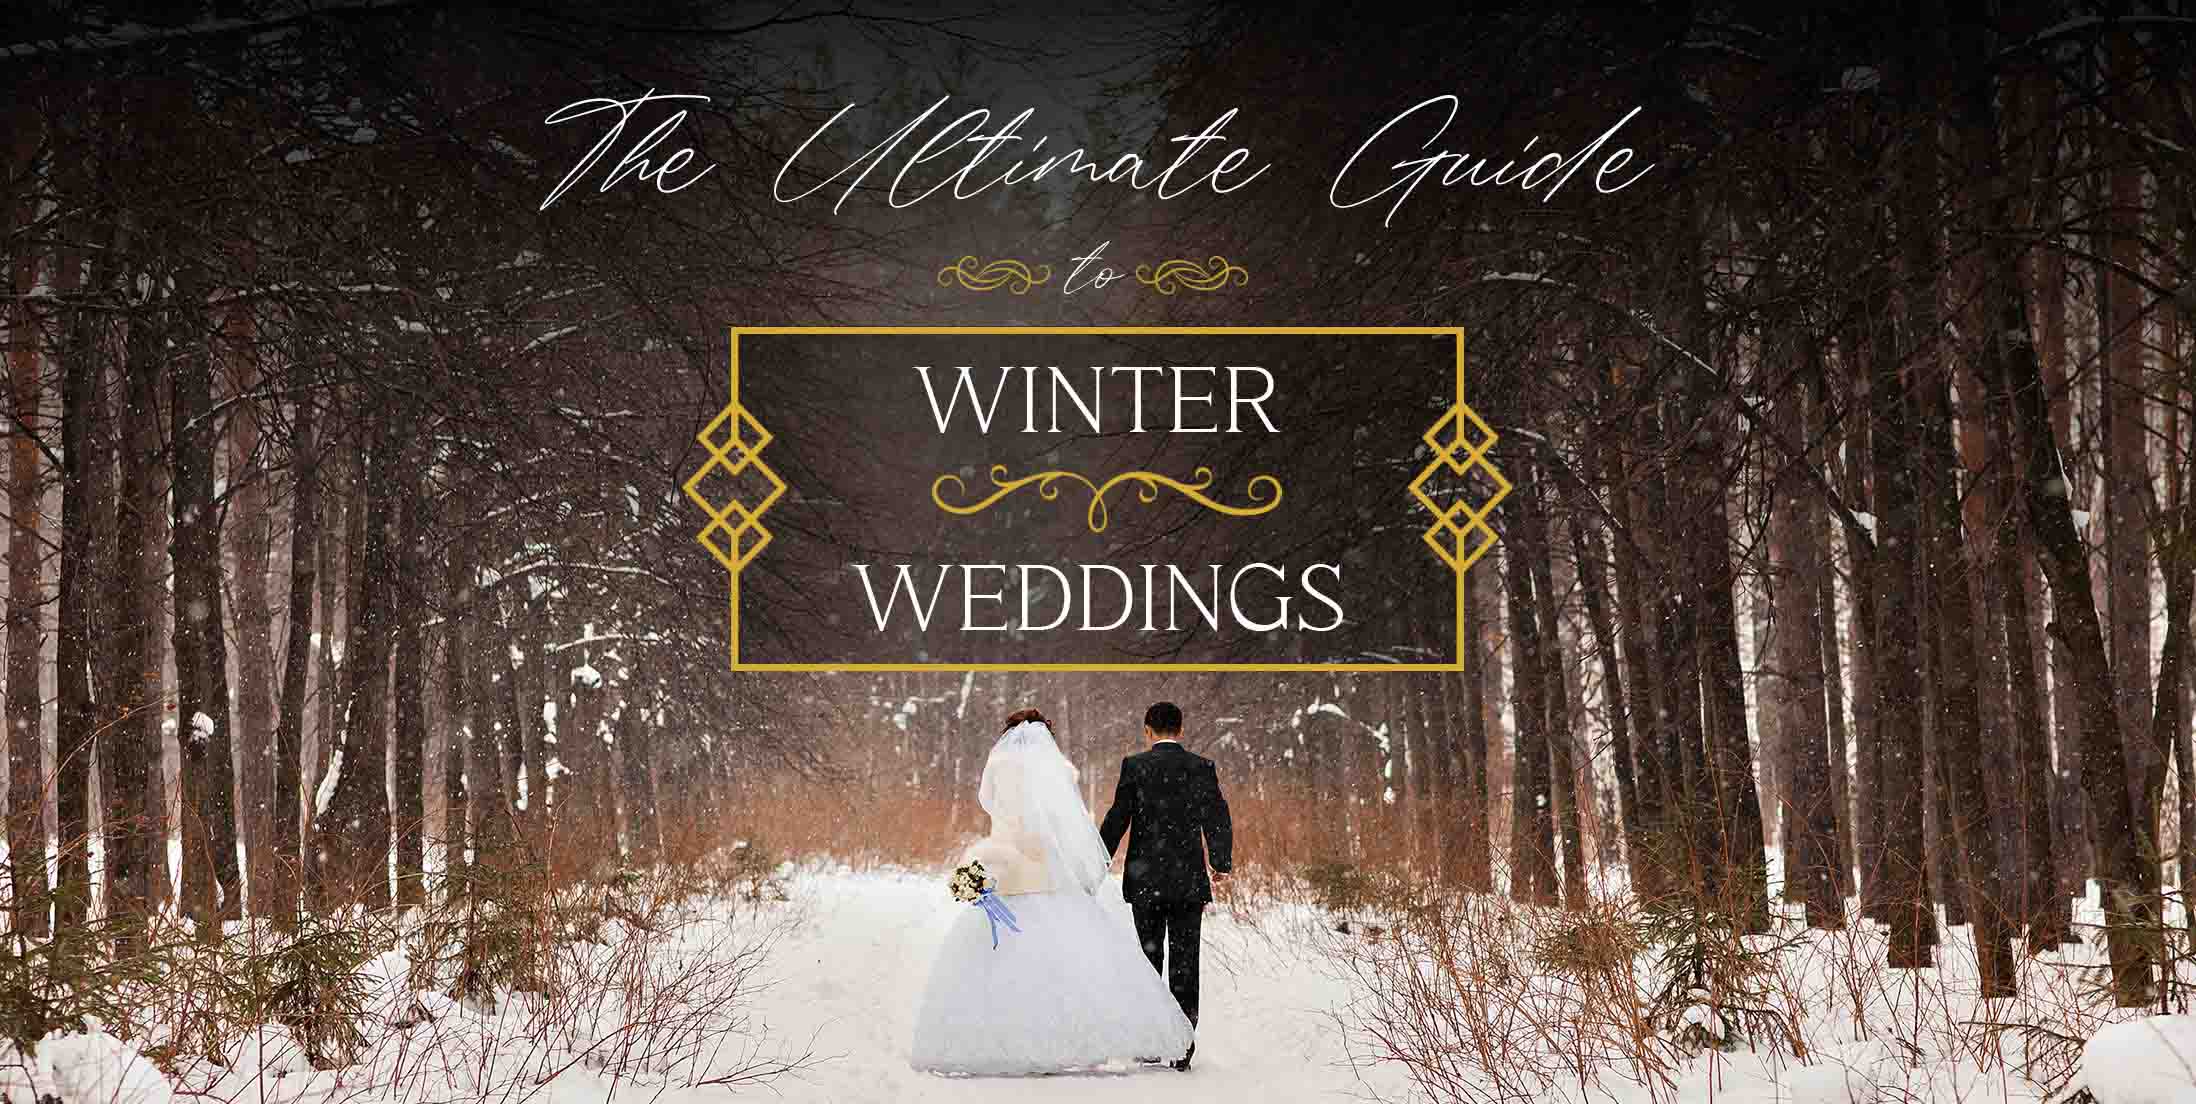 The Winter Wedding Guide